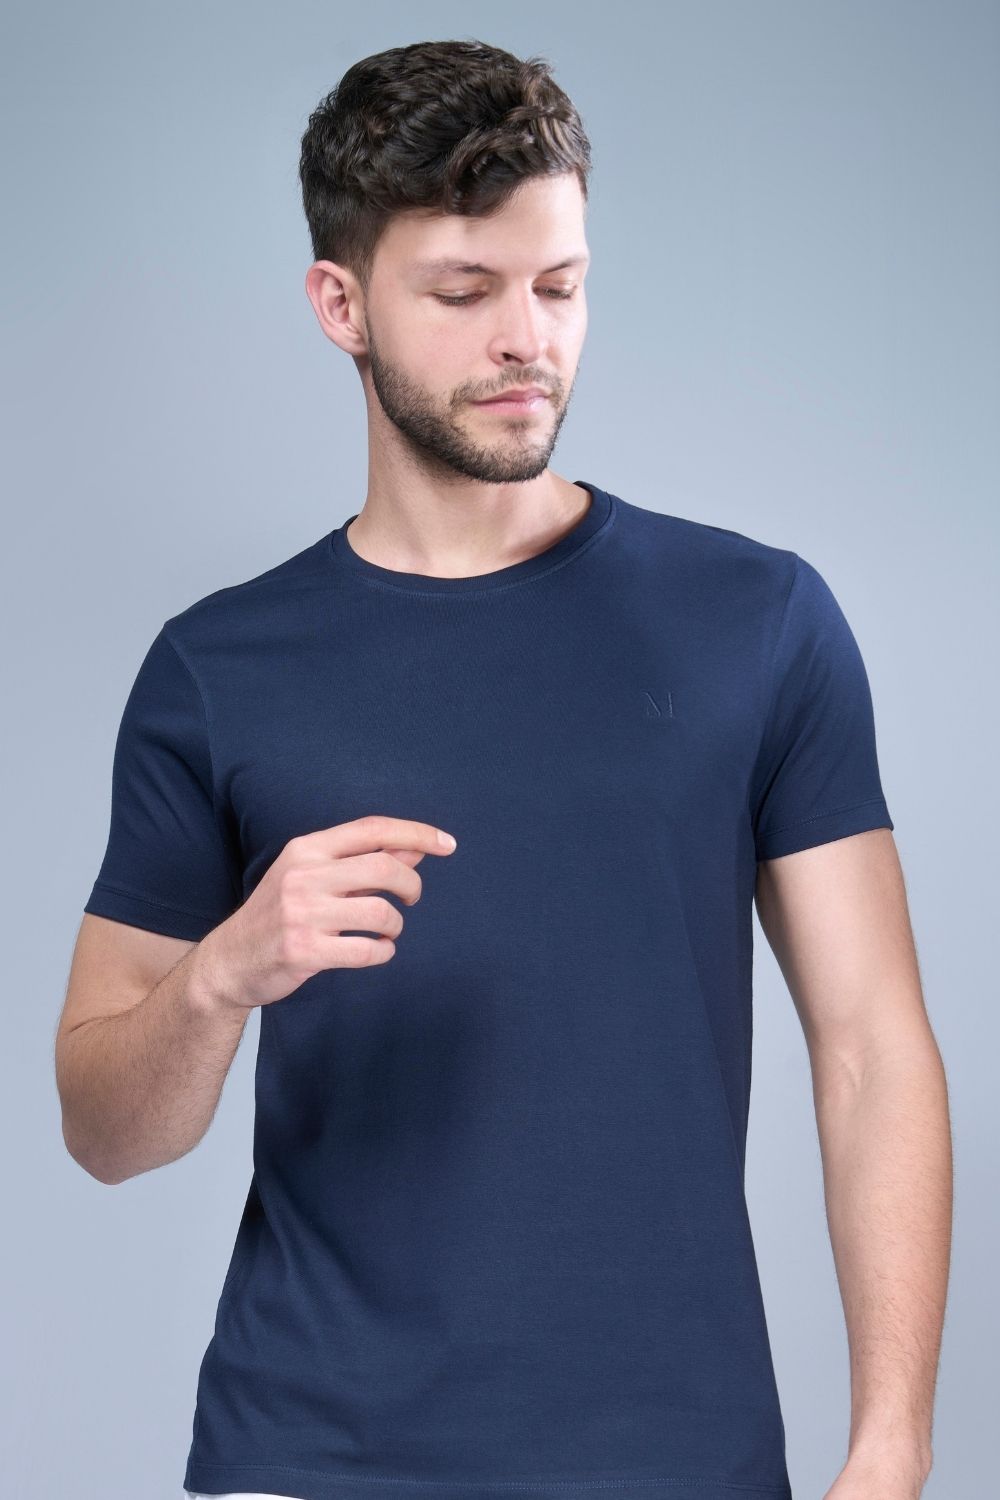 A model wearing Teal Navy colored, solid t shirt for men with round neck and half sleeves